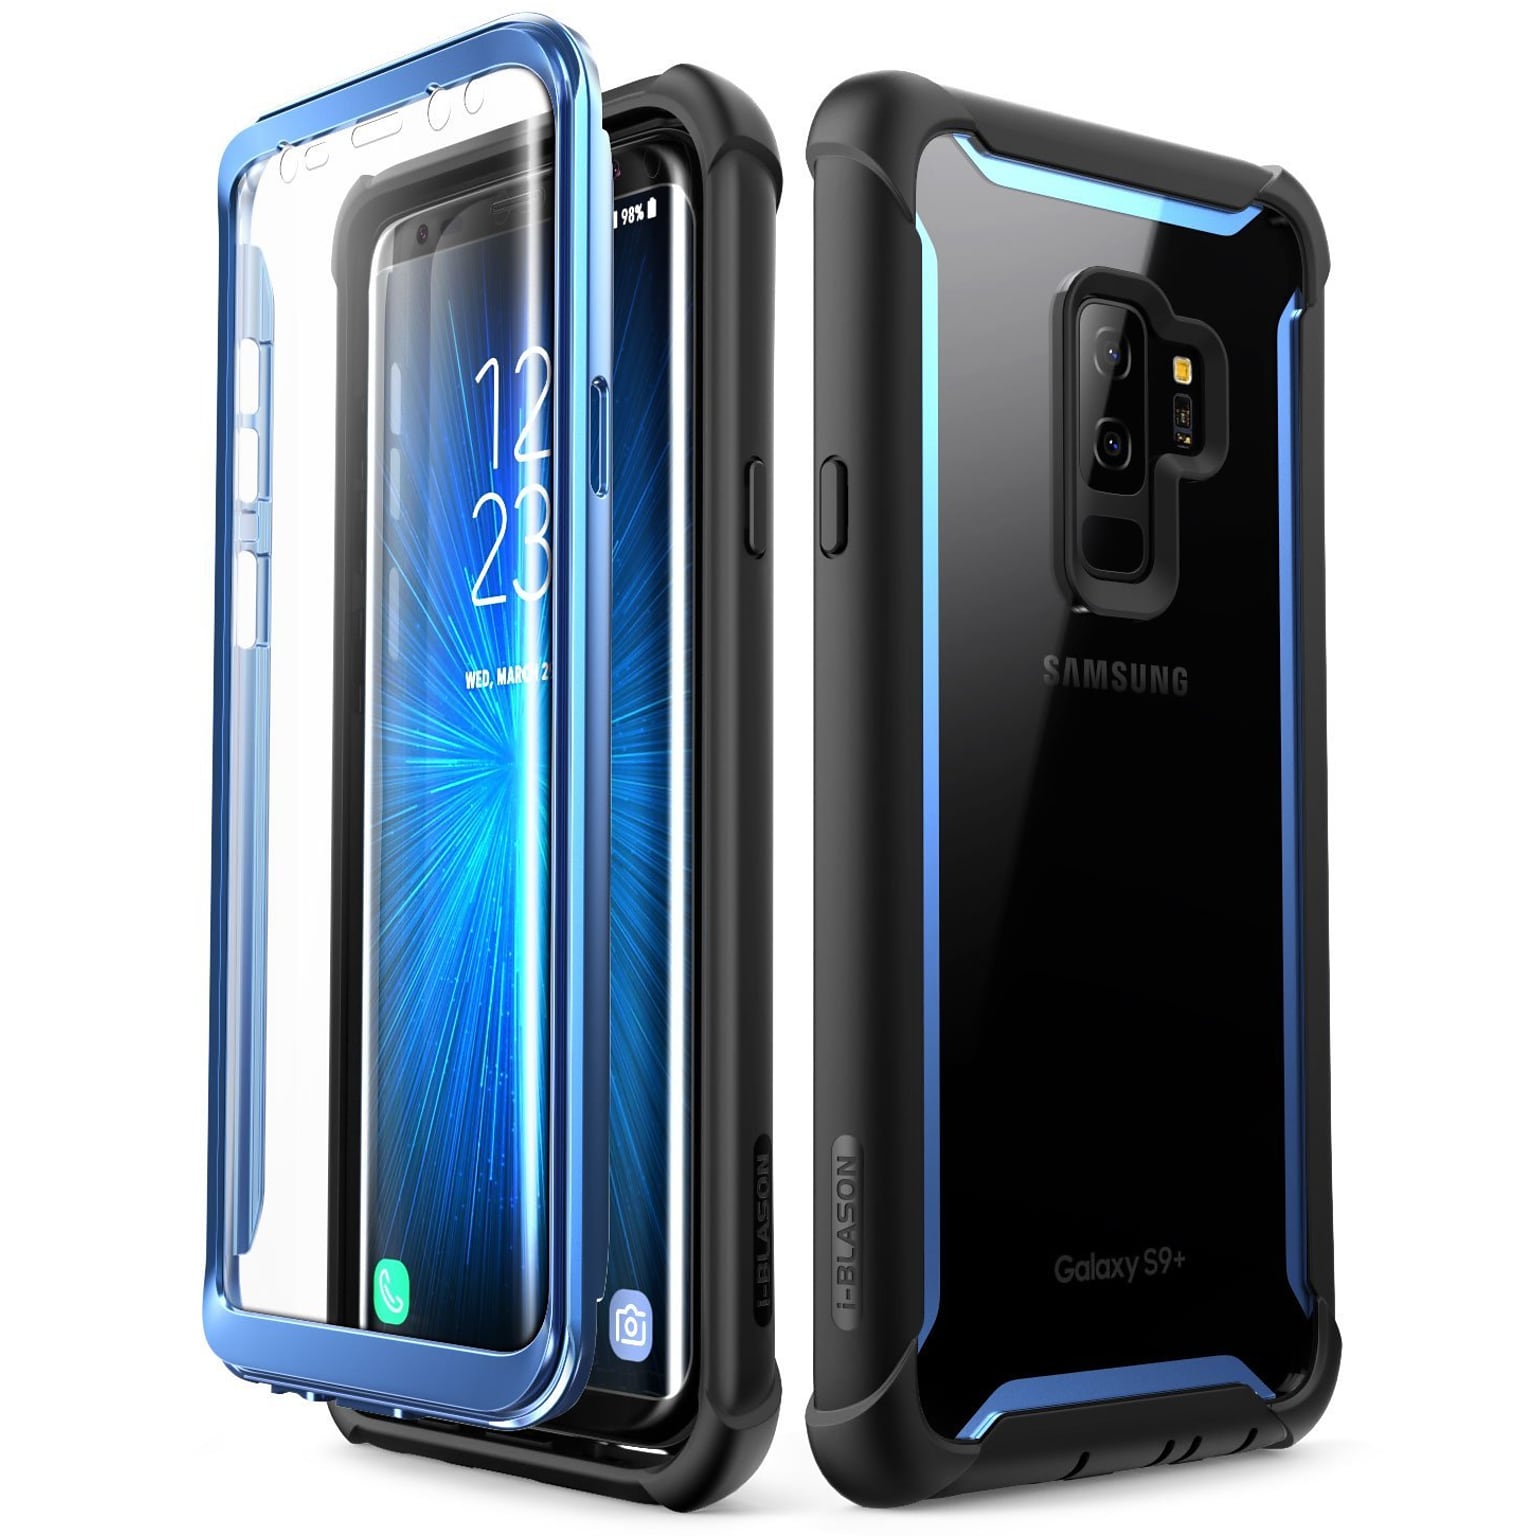 i-Blason Samsung Galaxy S9 Case Ares Rugged Clear Bumper Case Without Built-in Screen Protector, Blue (G-9P-ARES-SP-BE)